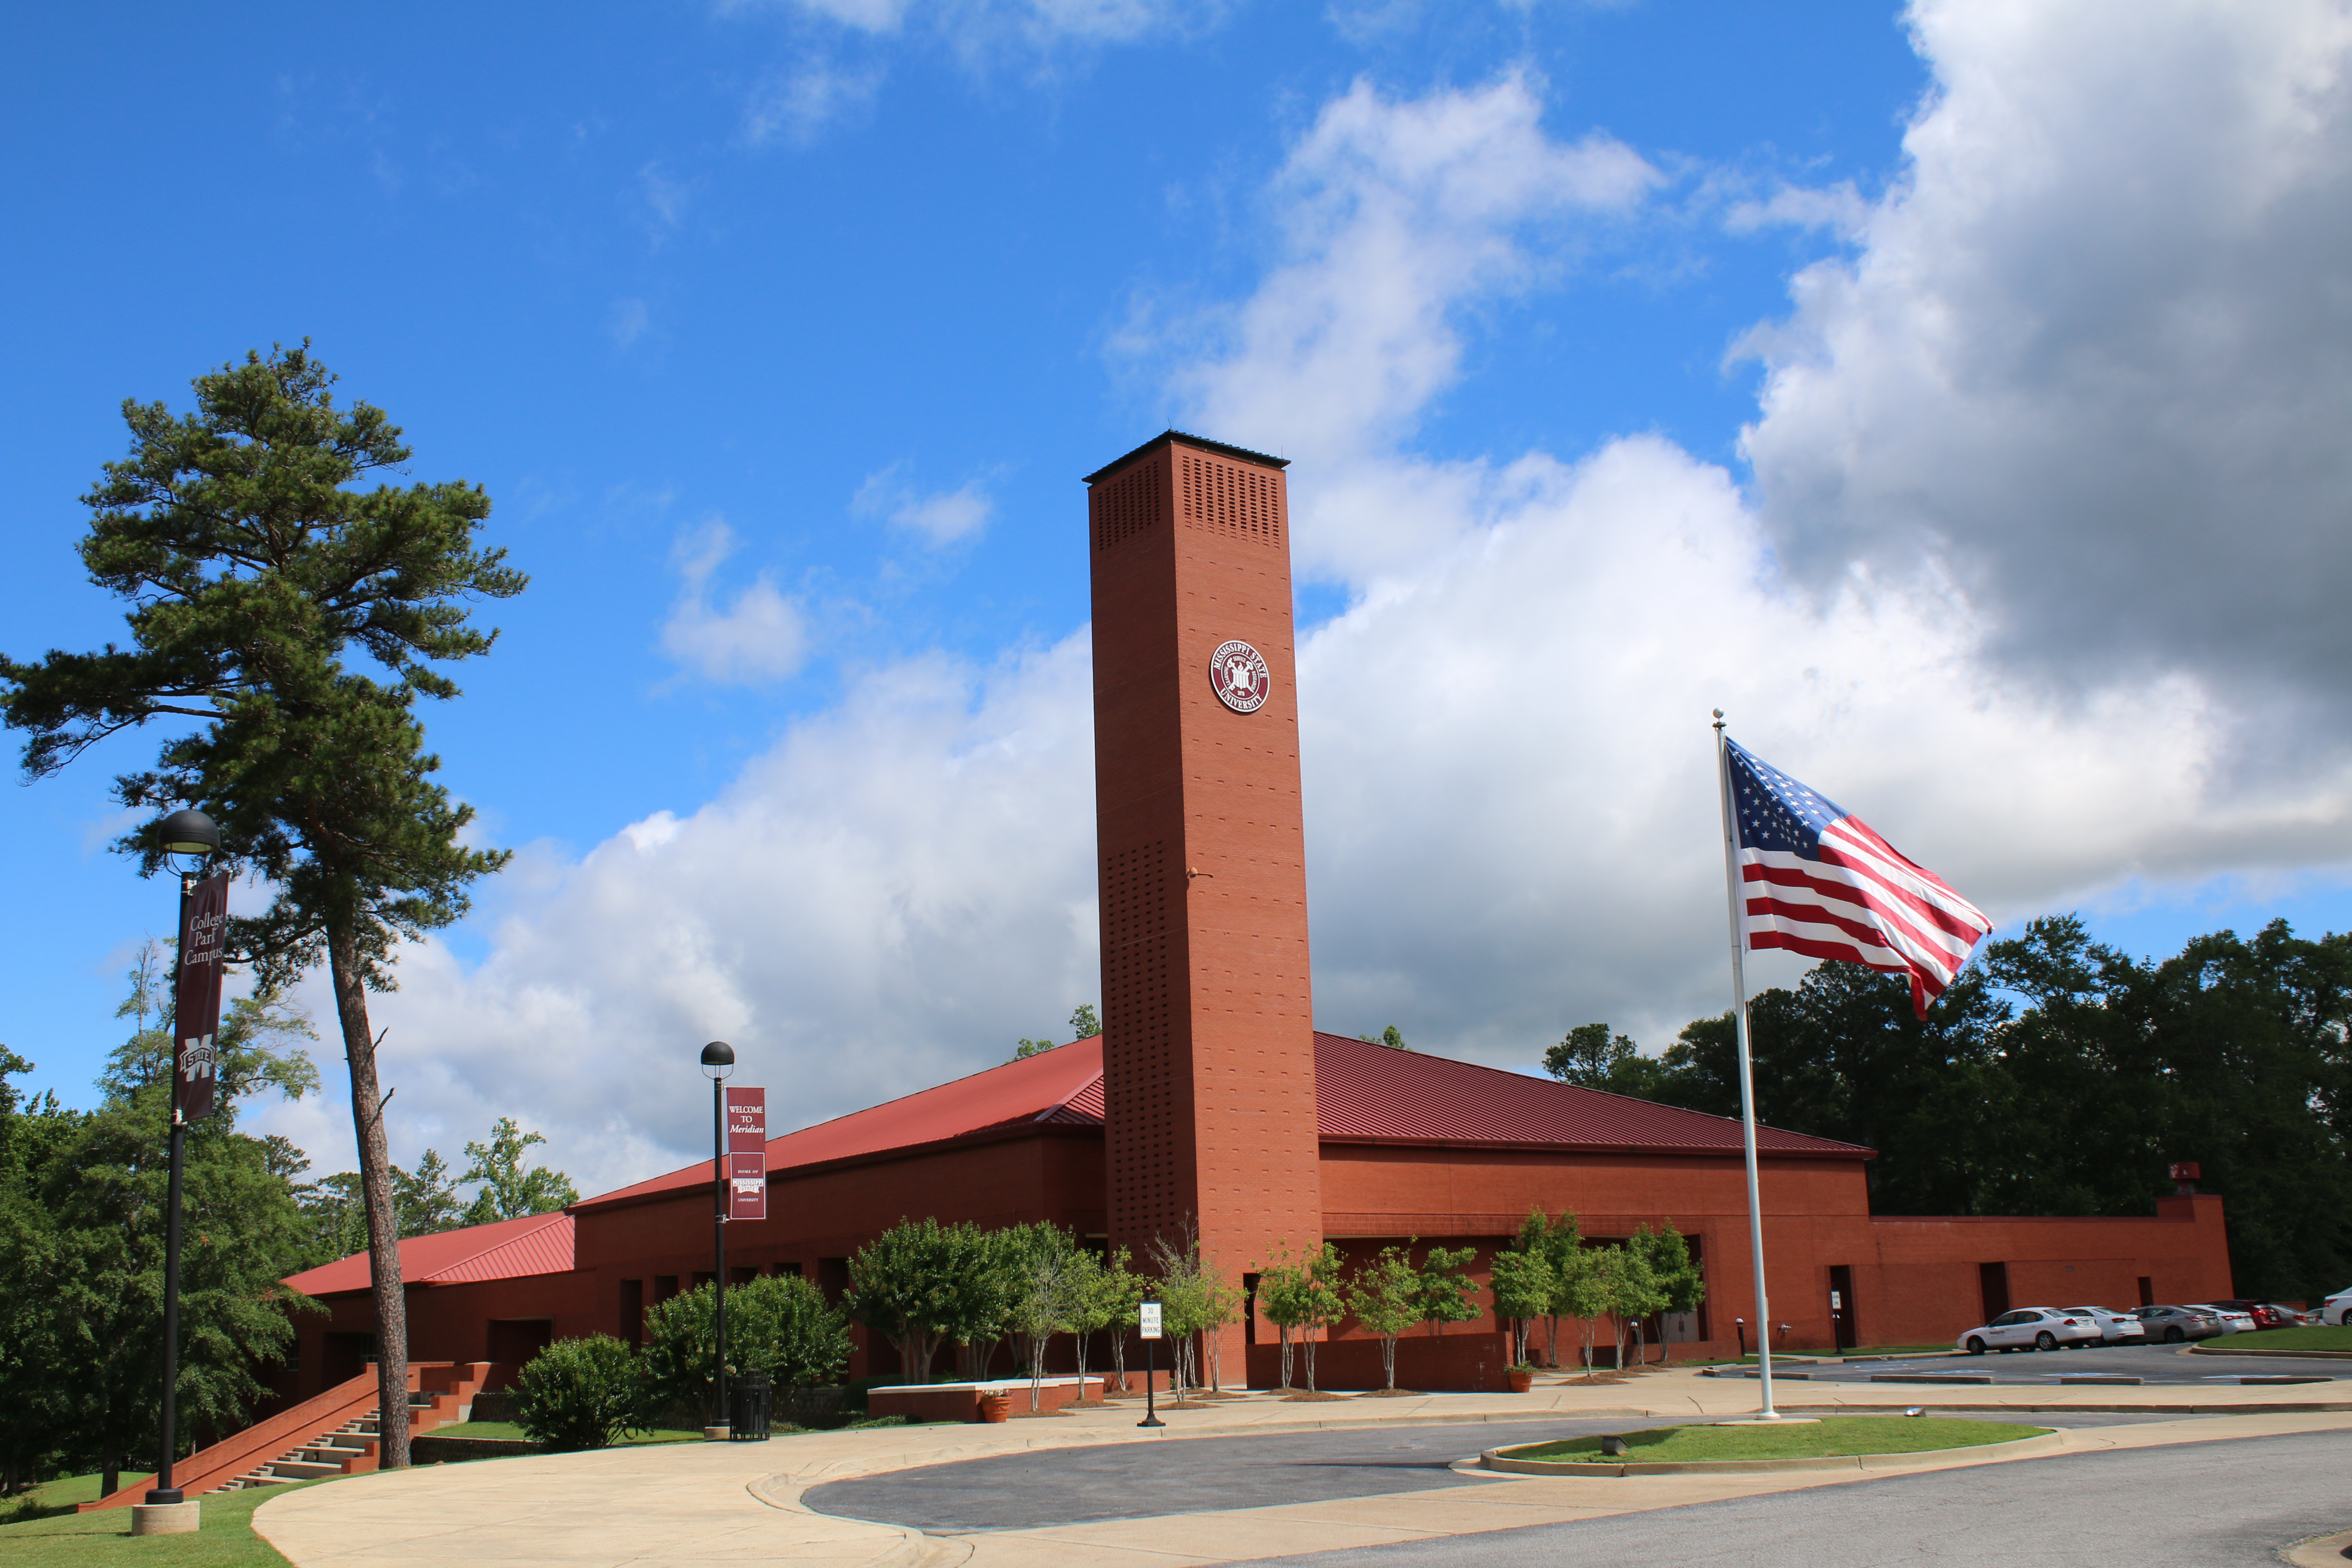 The front of College Park Campus, red brick building with tall brick tower and MSU seal, with American flag waving in front